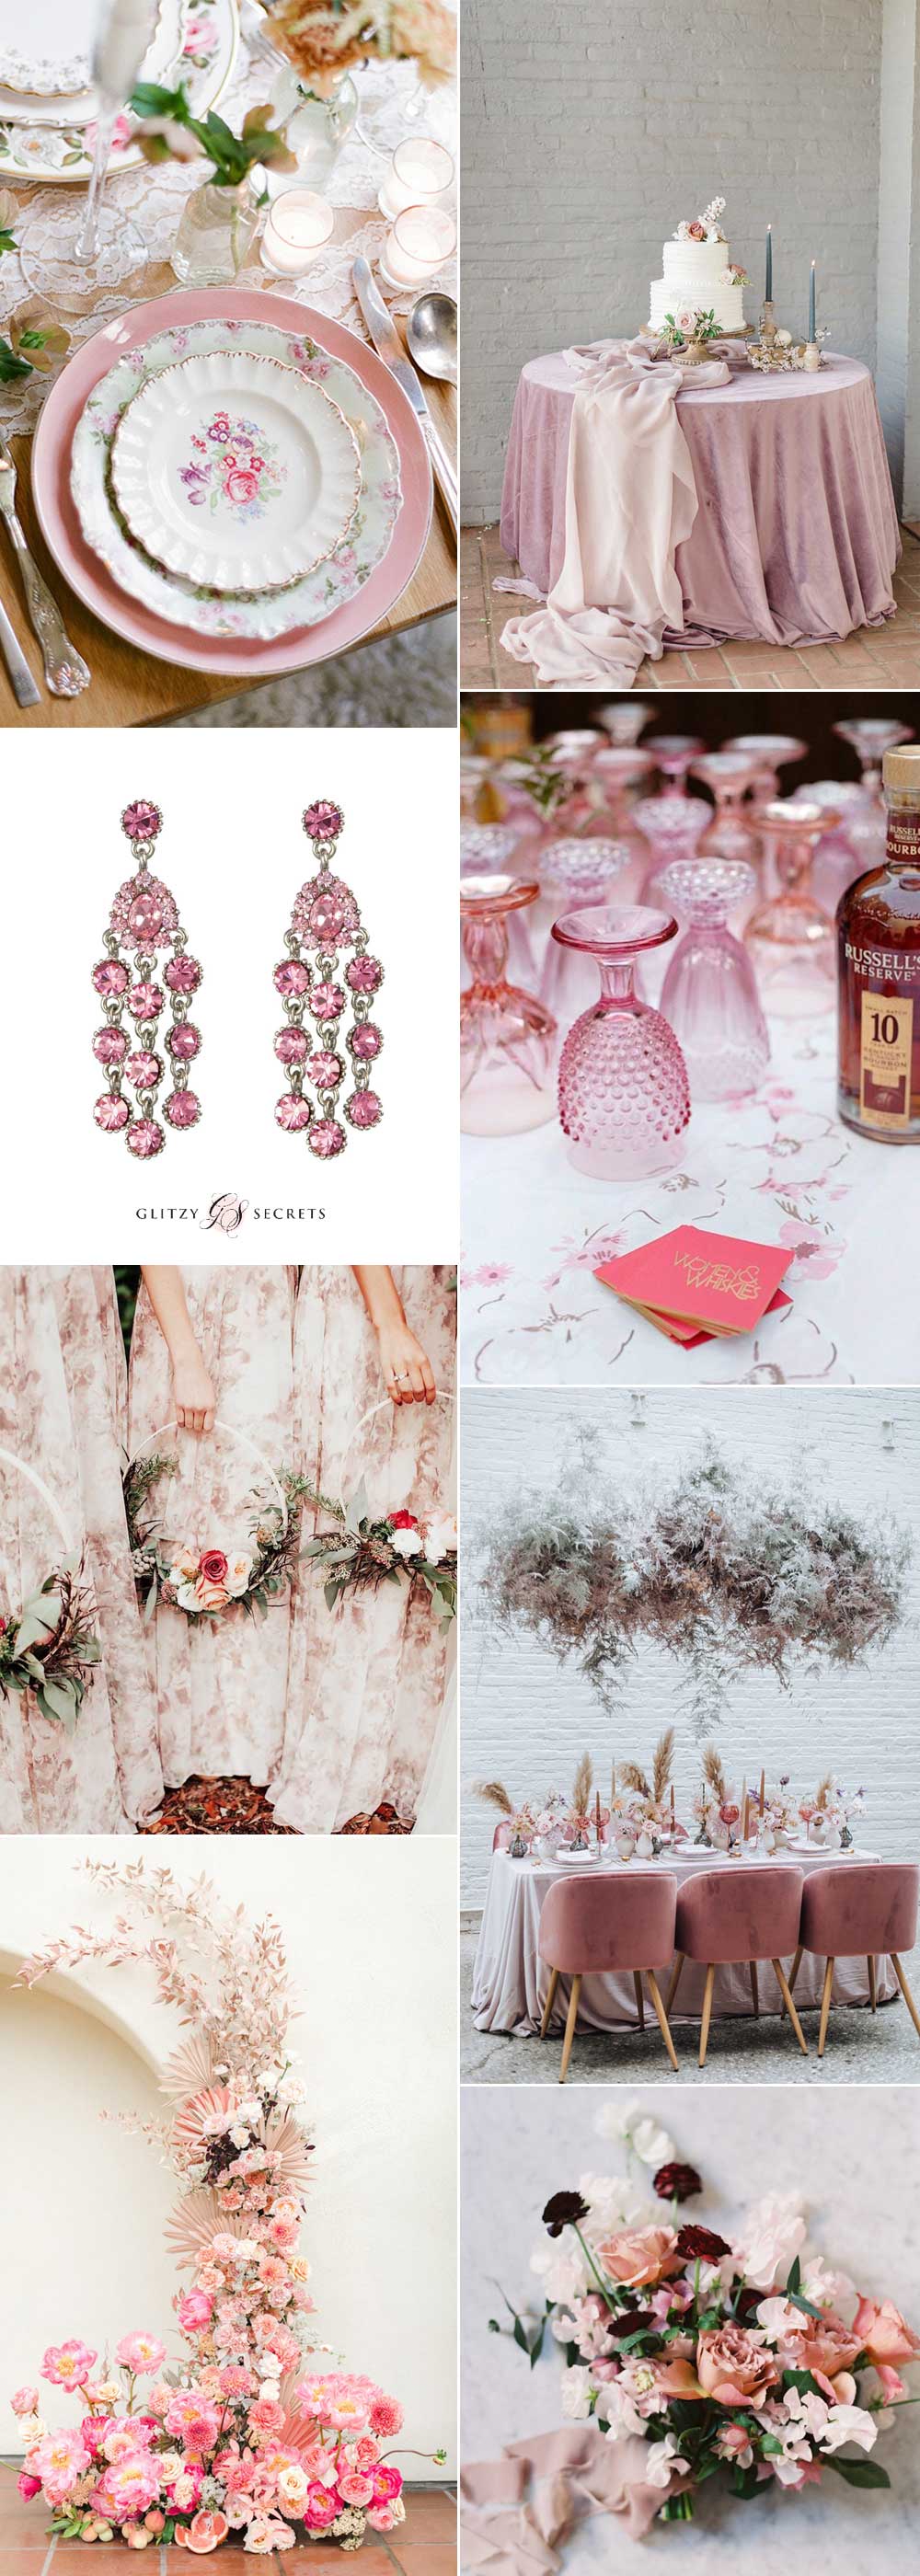 Inspiration using pink florals and vintage china for a spring wedding day